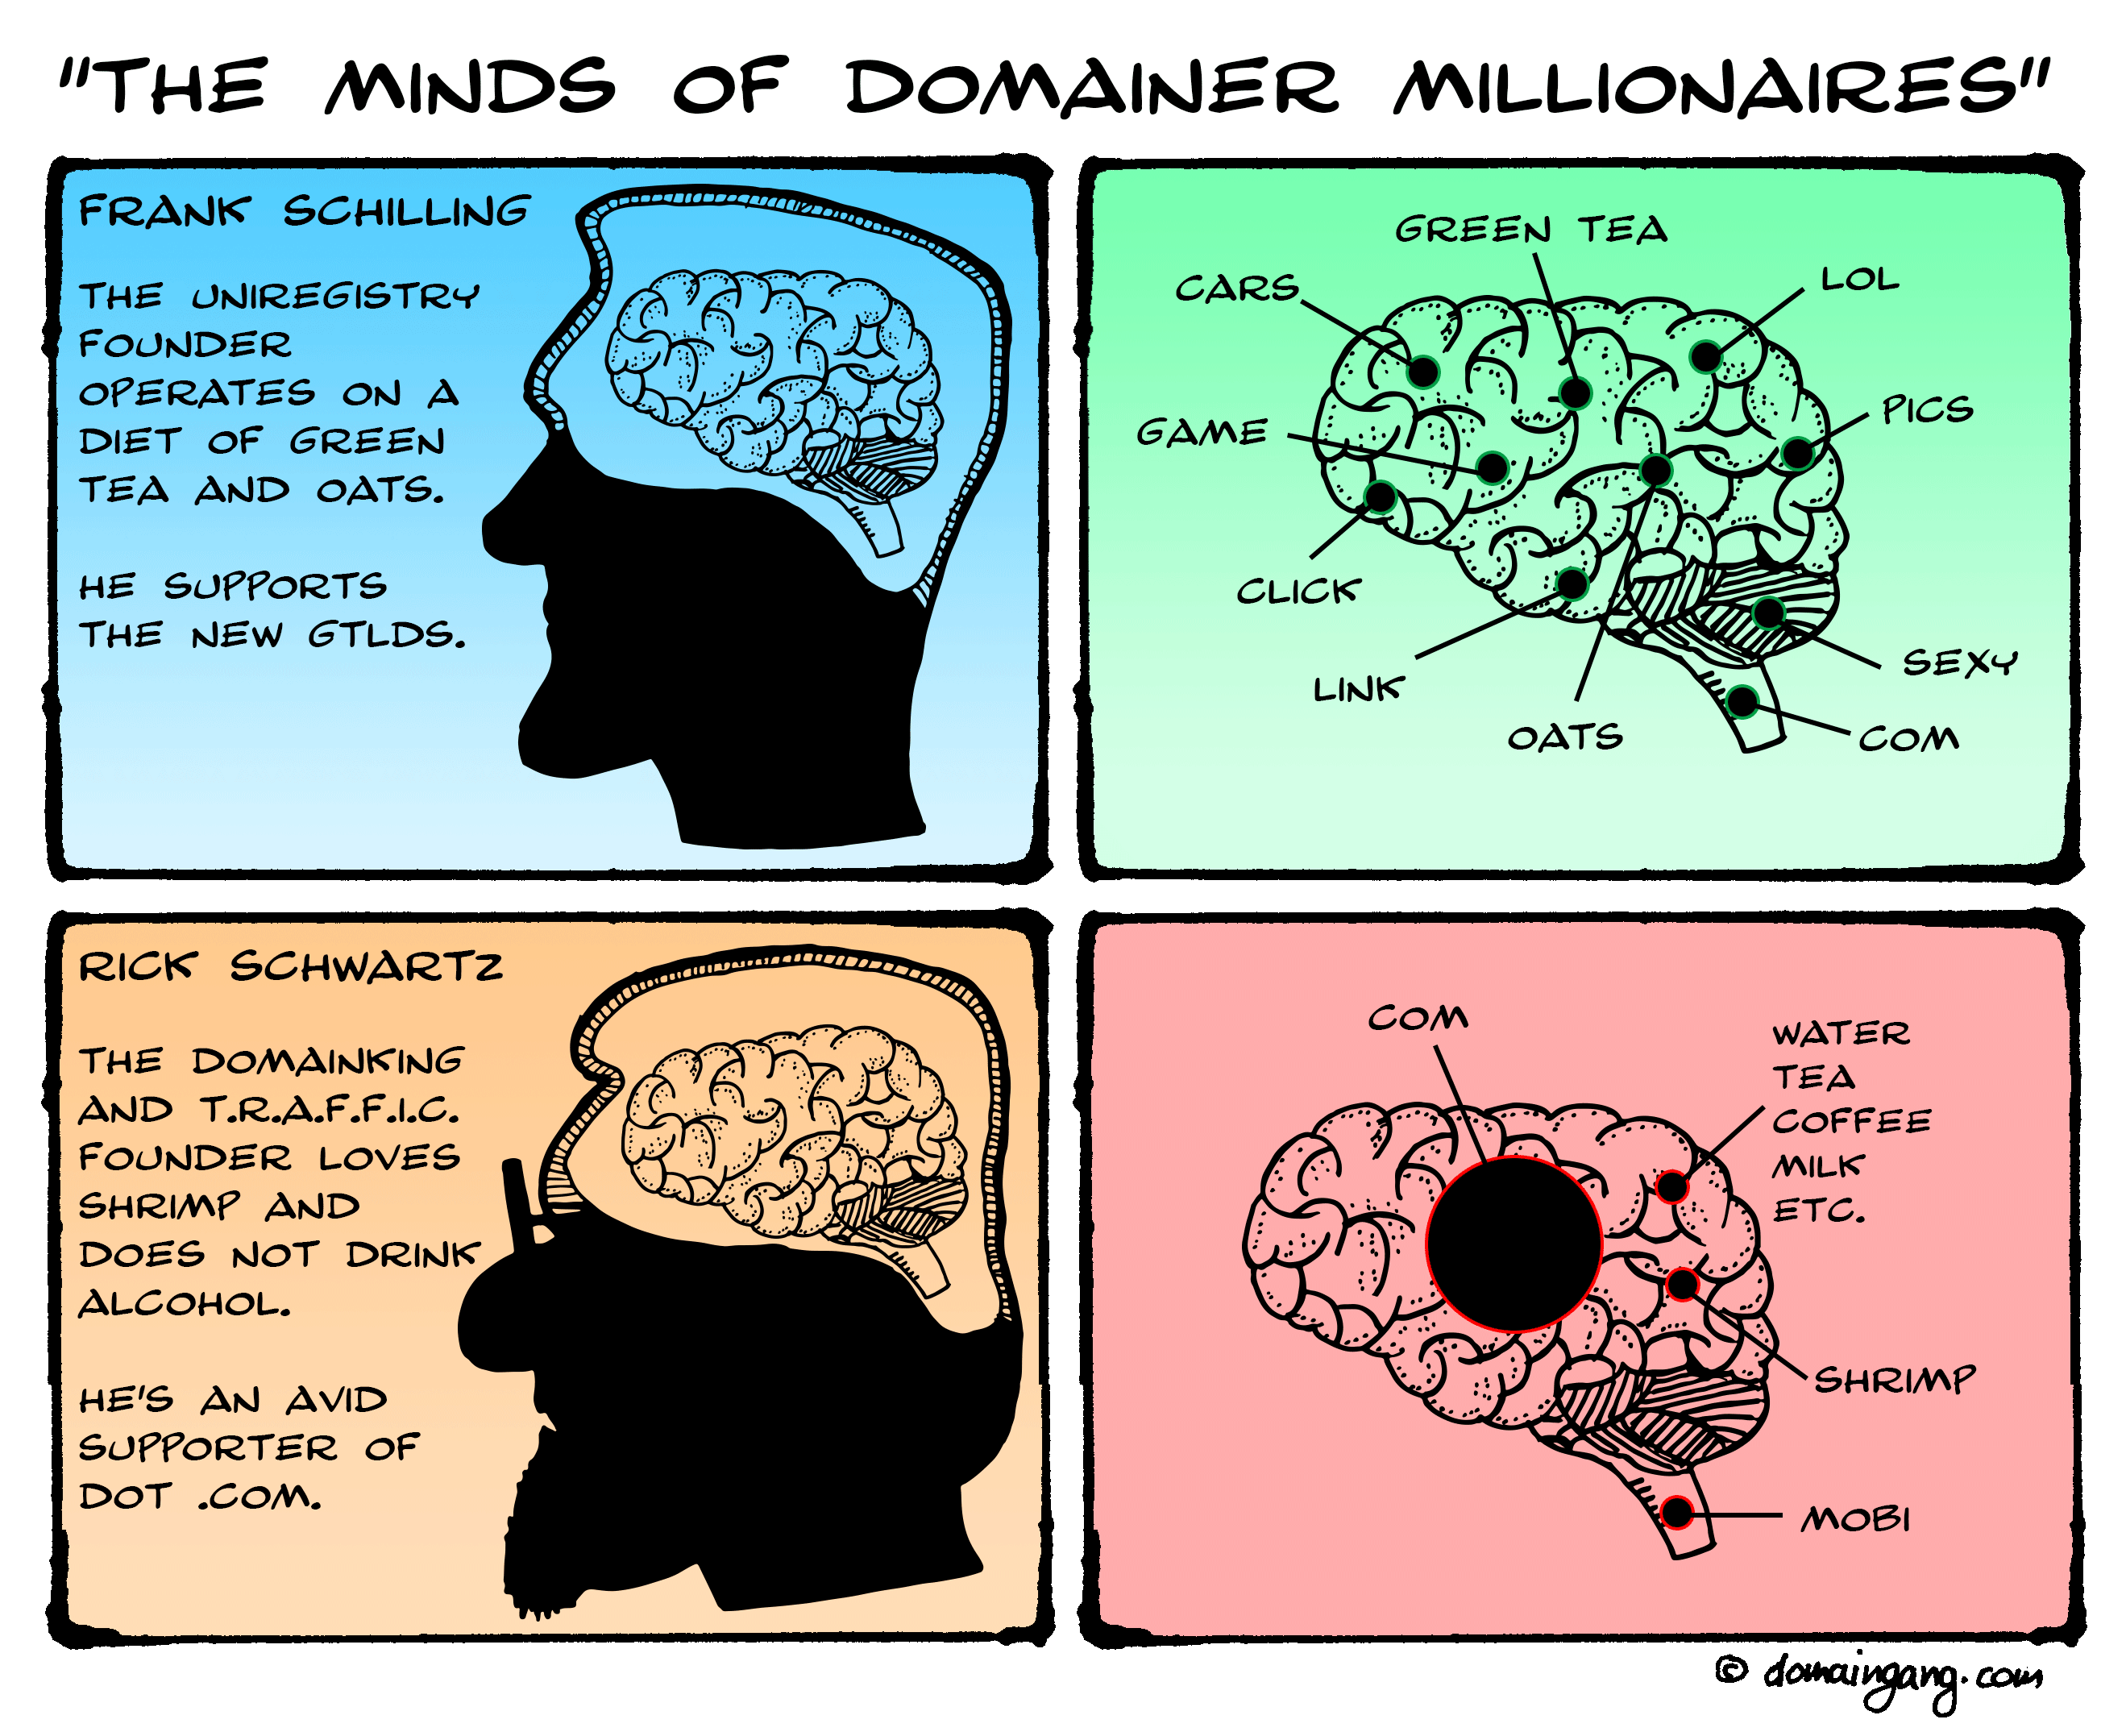 The Minds of Domainer Millionaires…